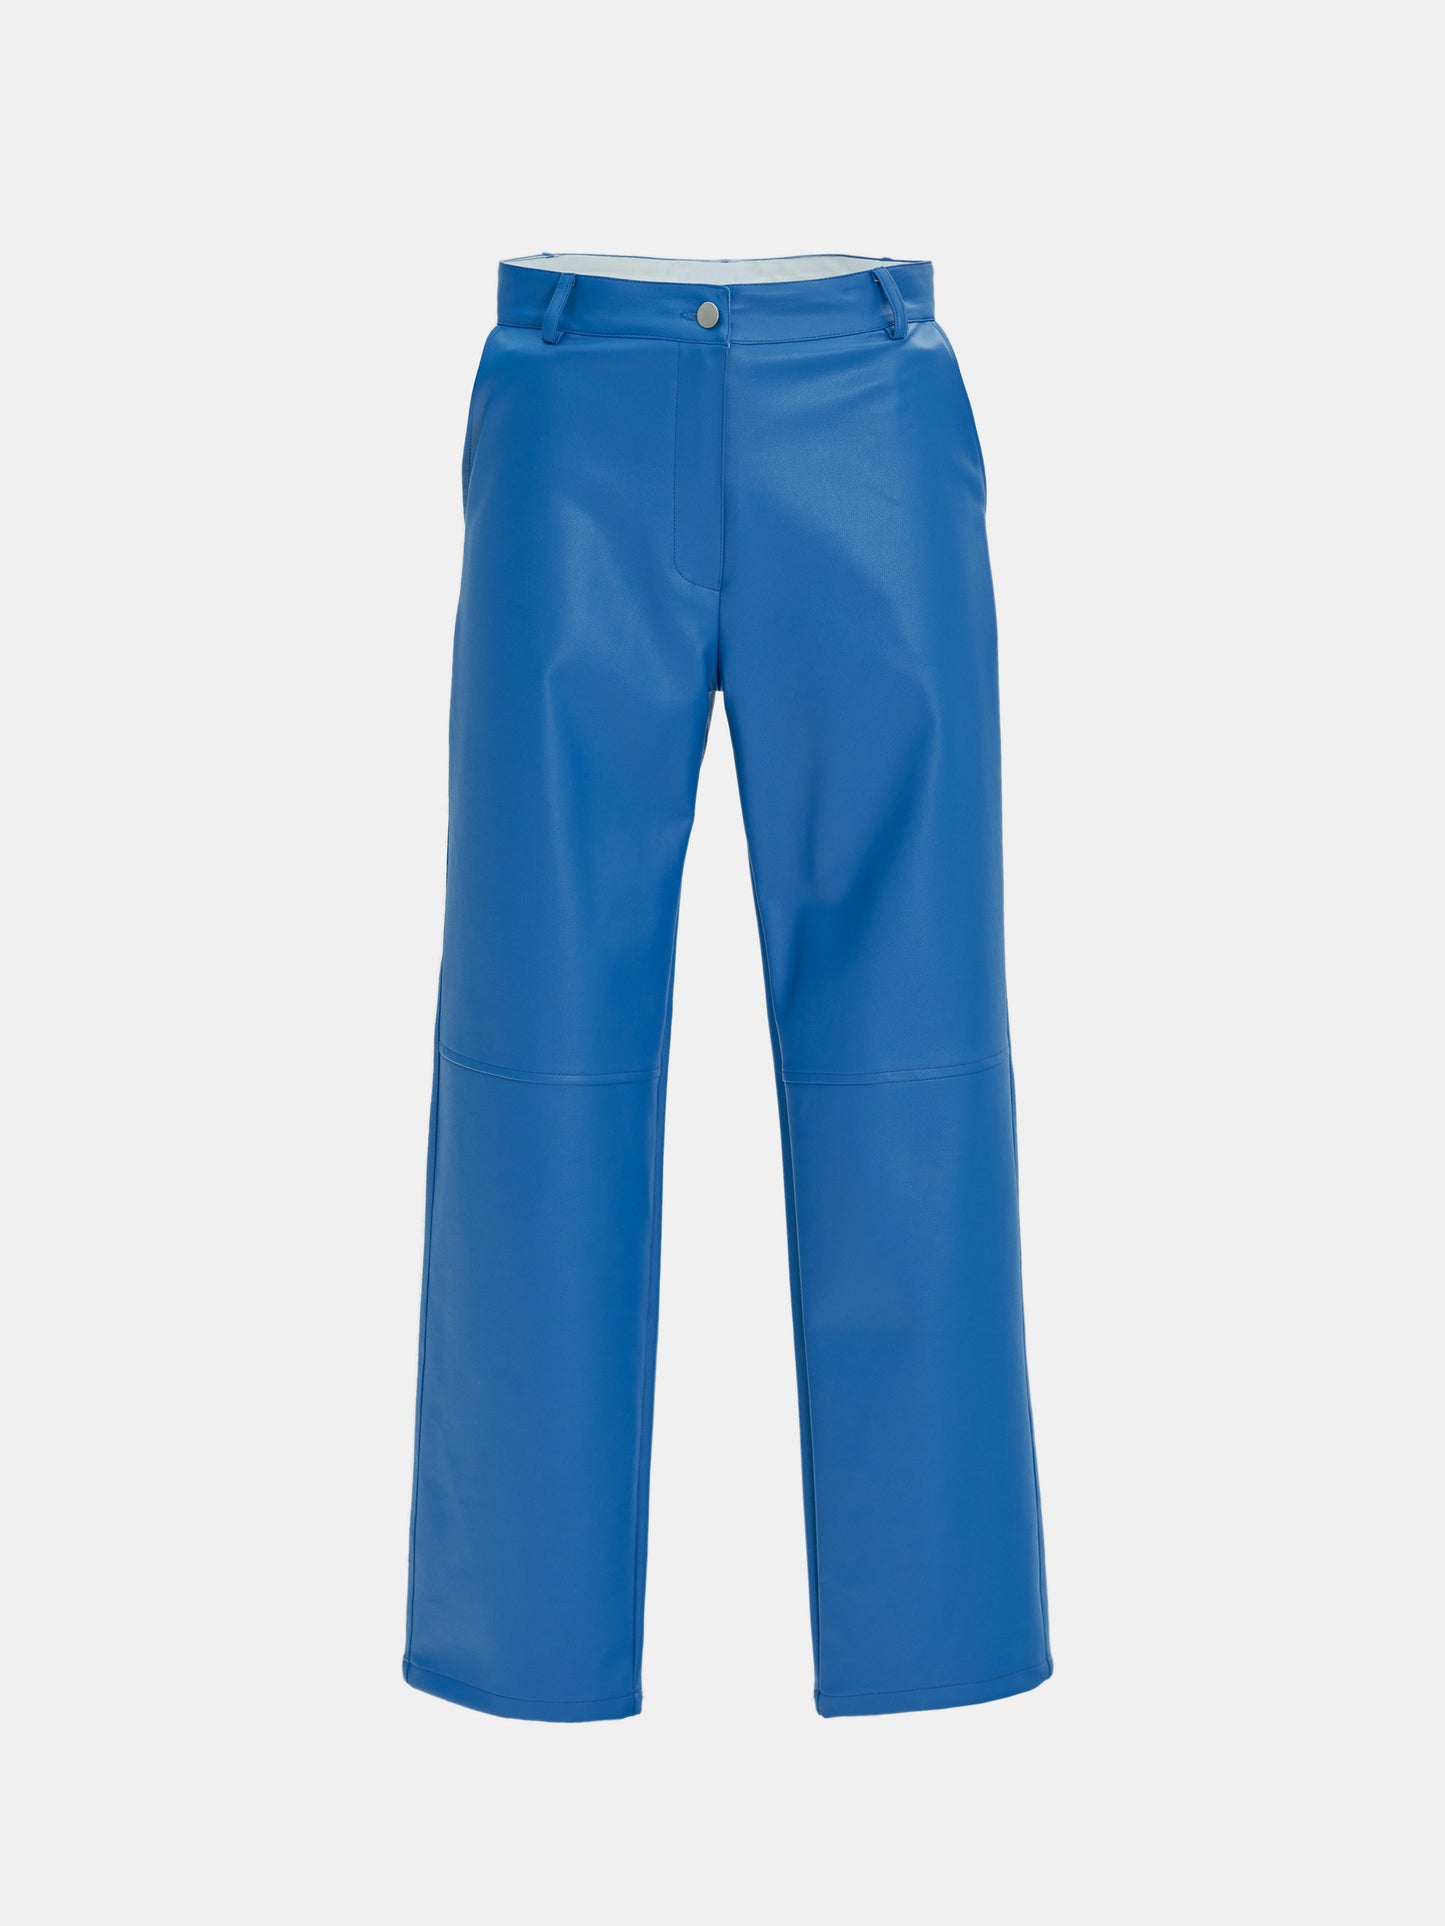 Skinny Faux Leather Pants, Cobalt